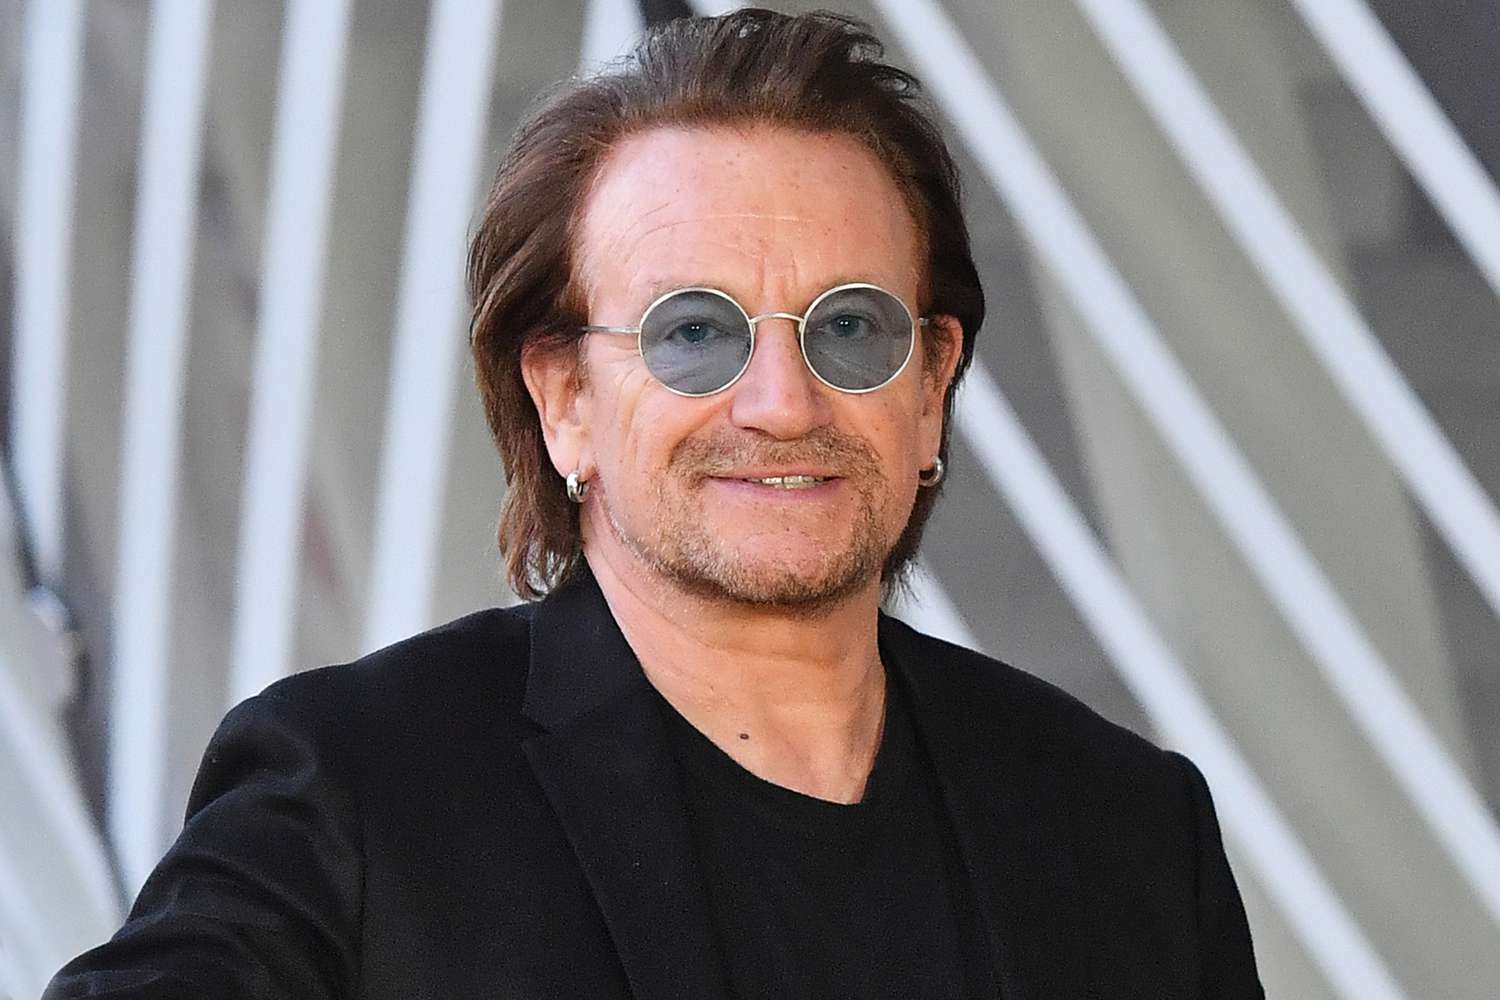 Bono on Discovering He Has a Half-Brother from His Late Father's Affair: 'I Love and Adore' Him